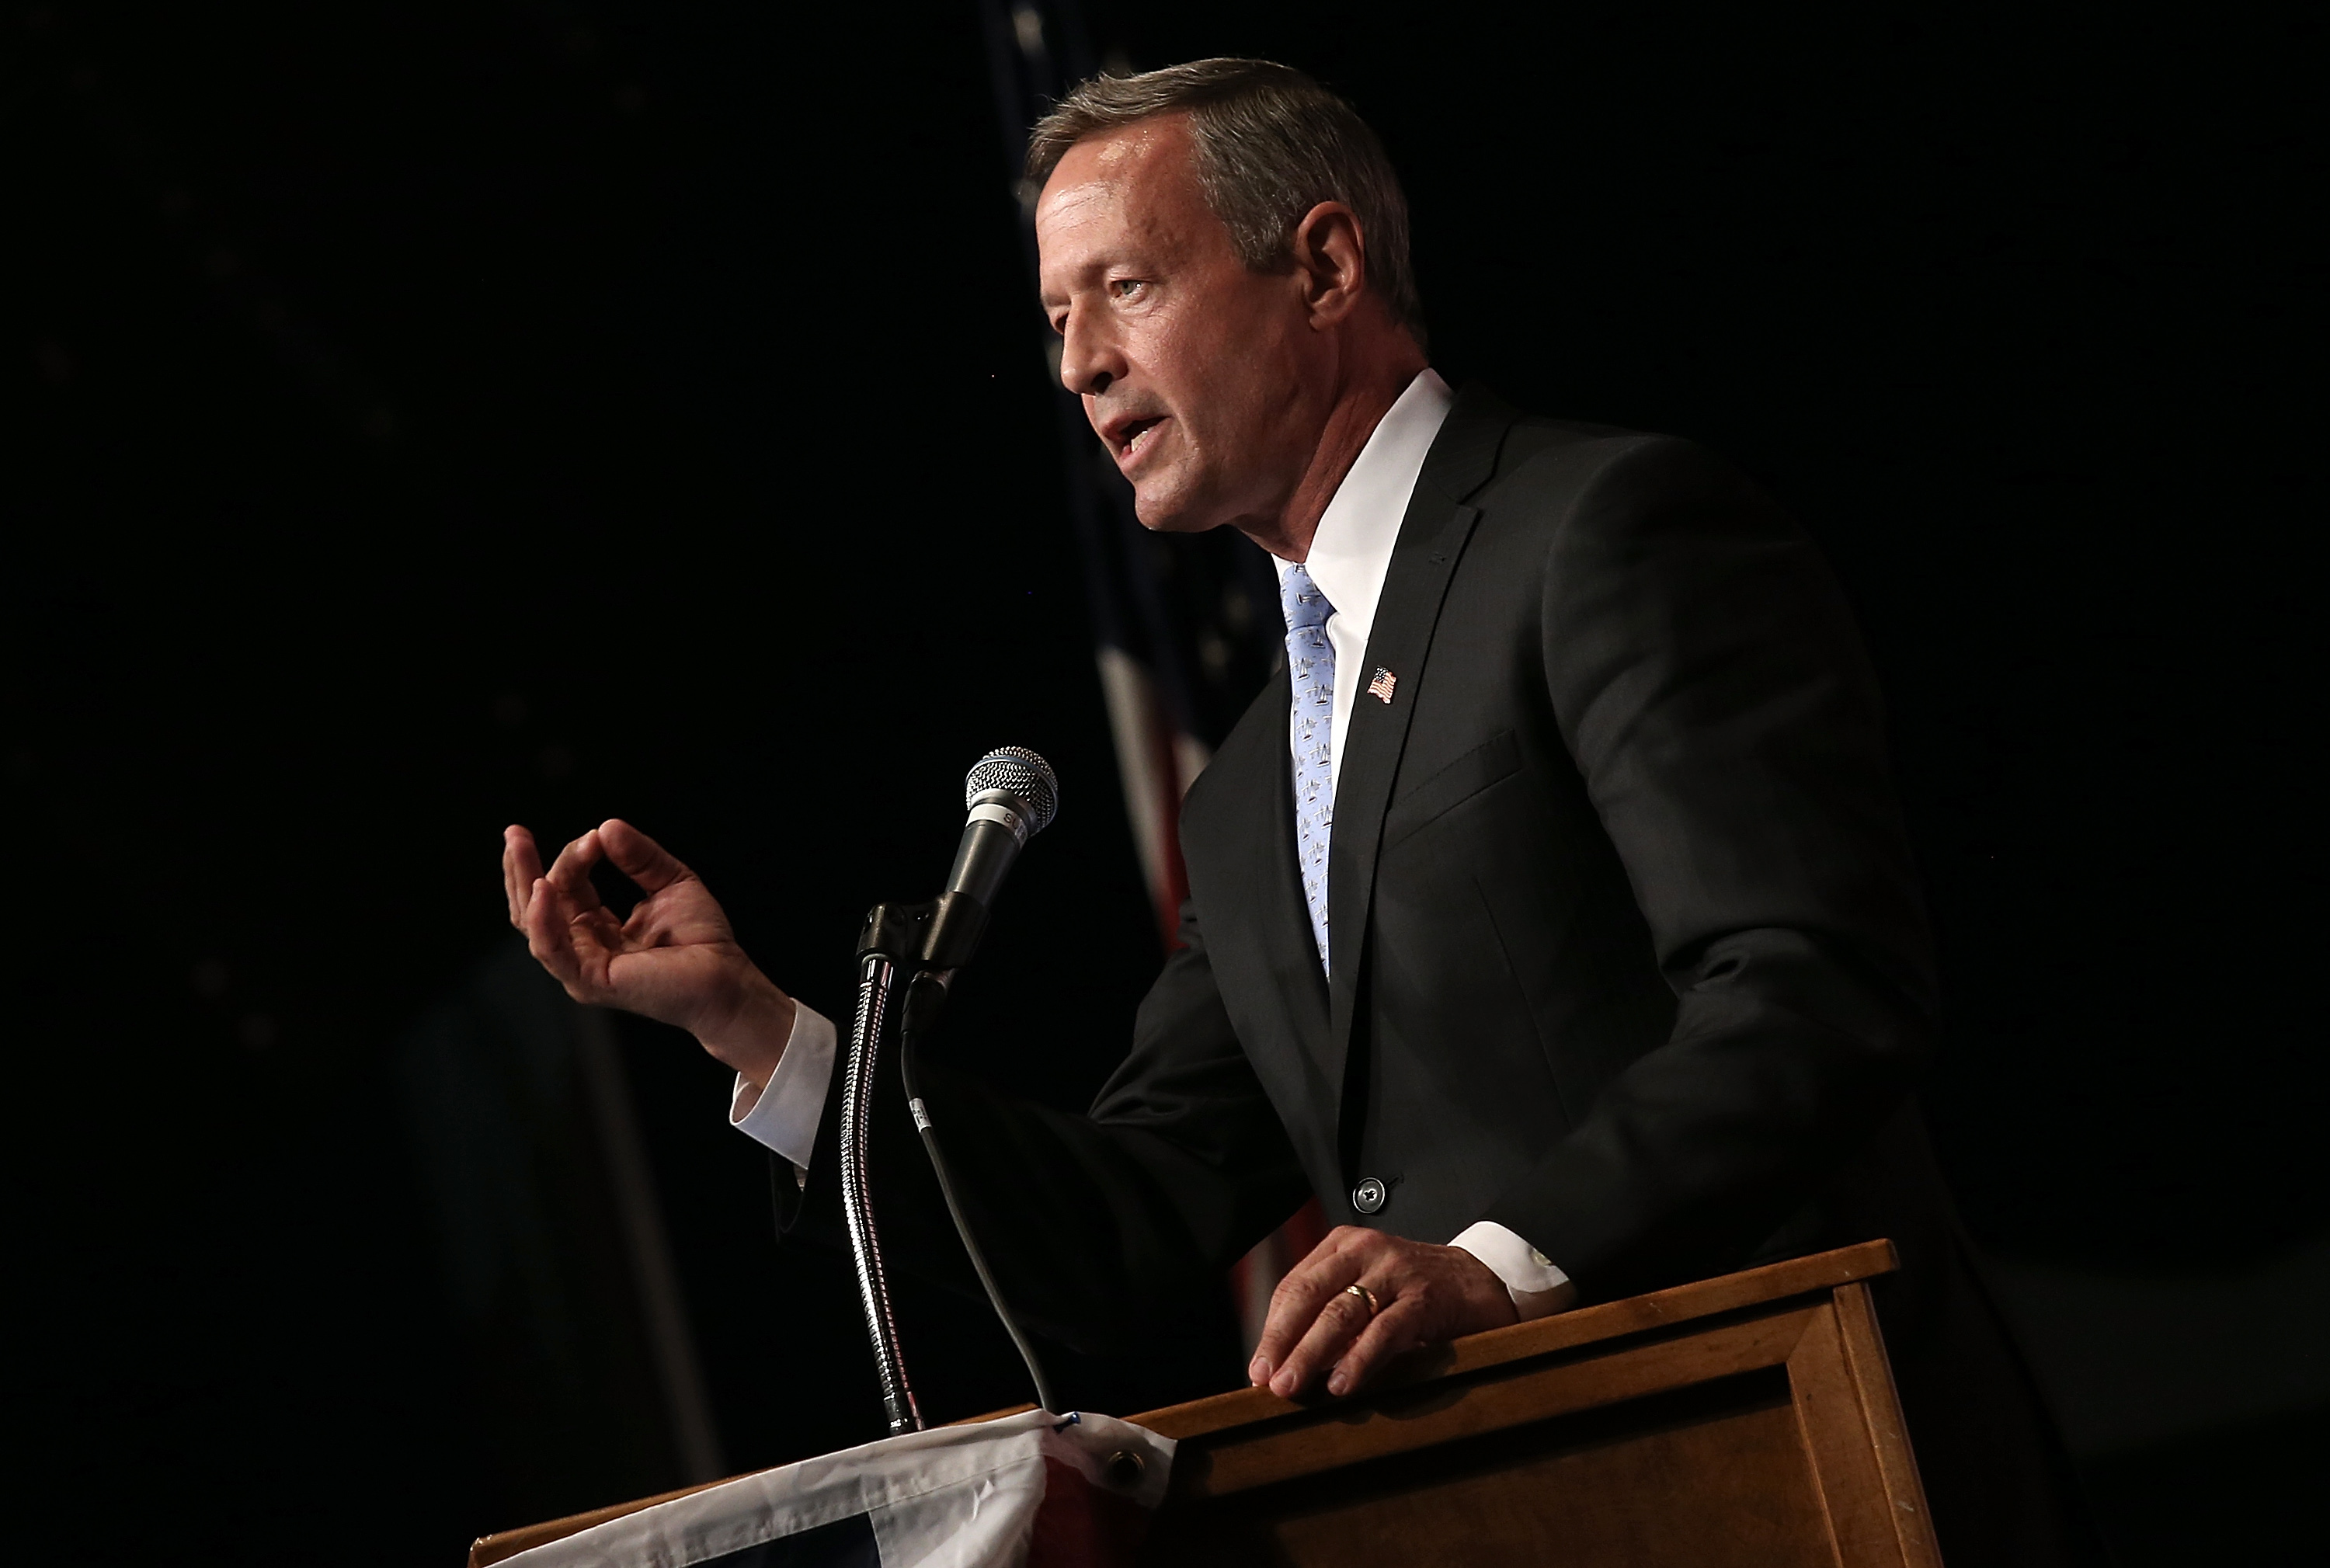 Democratic presidential candidate Martin O'Malley speaks at the Iowa Democratic Wing Ding August 14, 2015 in Clear Lake, Iowa. (Win McNamee&mdash;Getty Images)